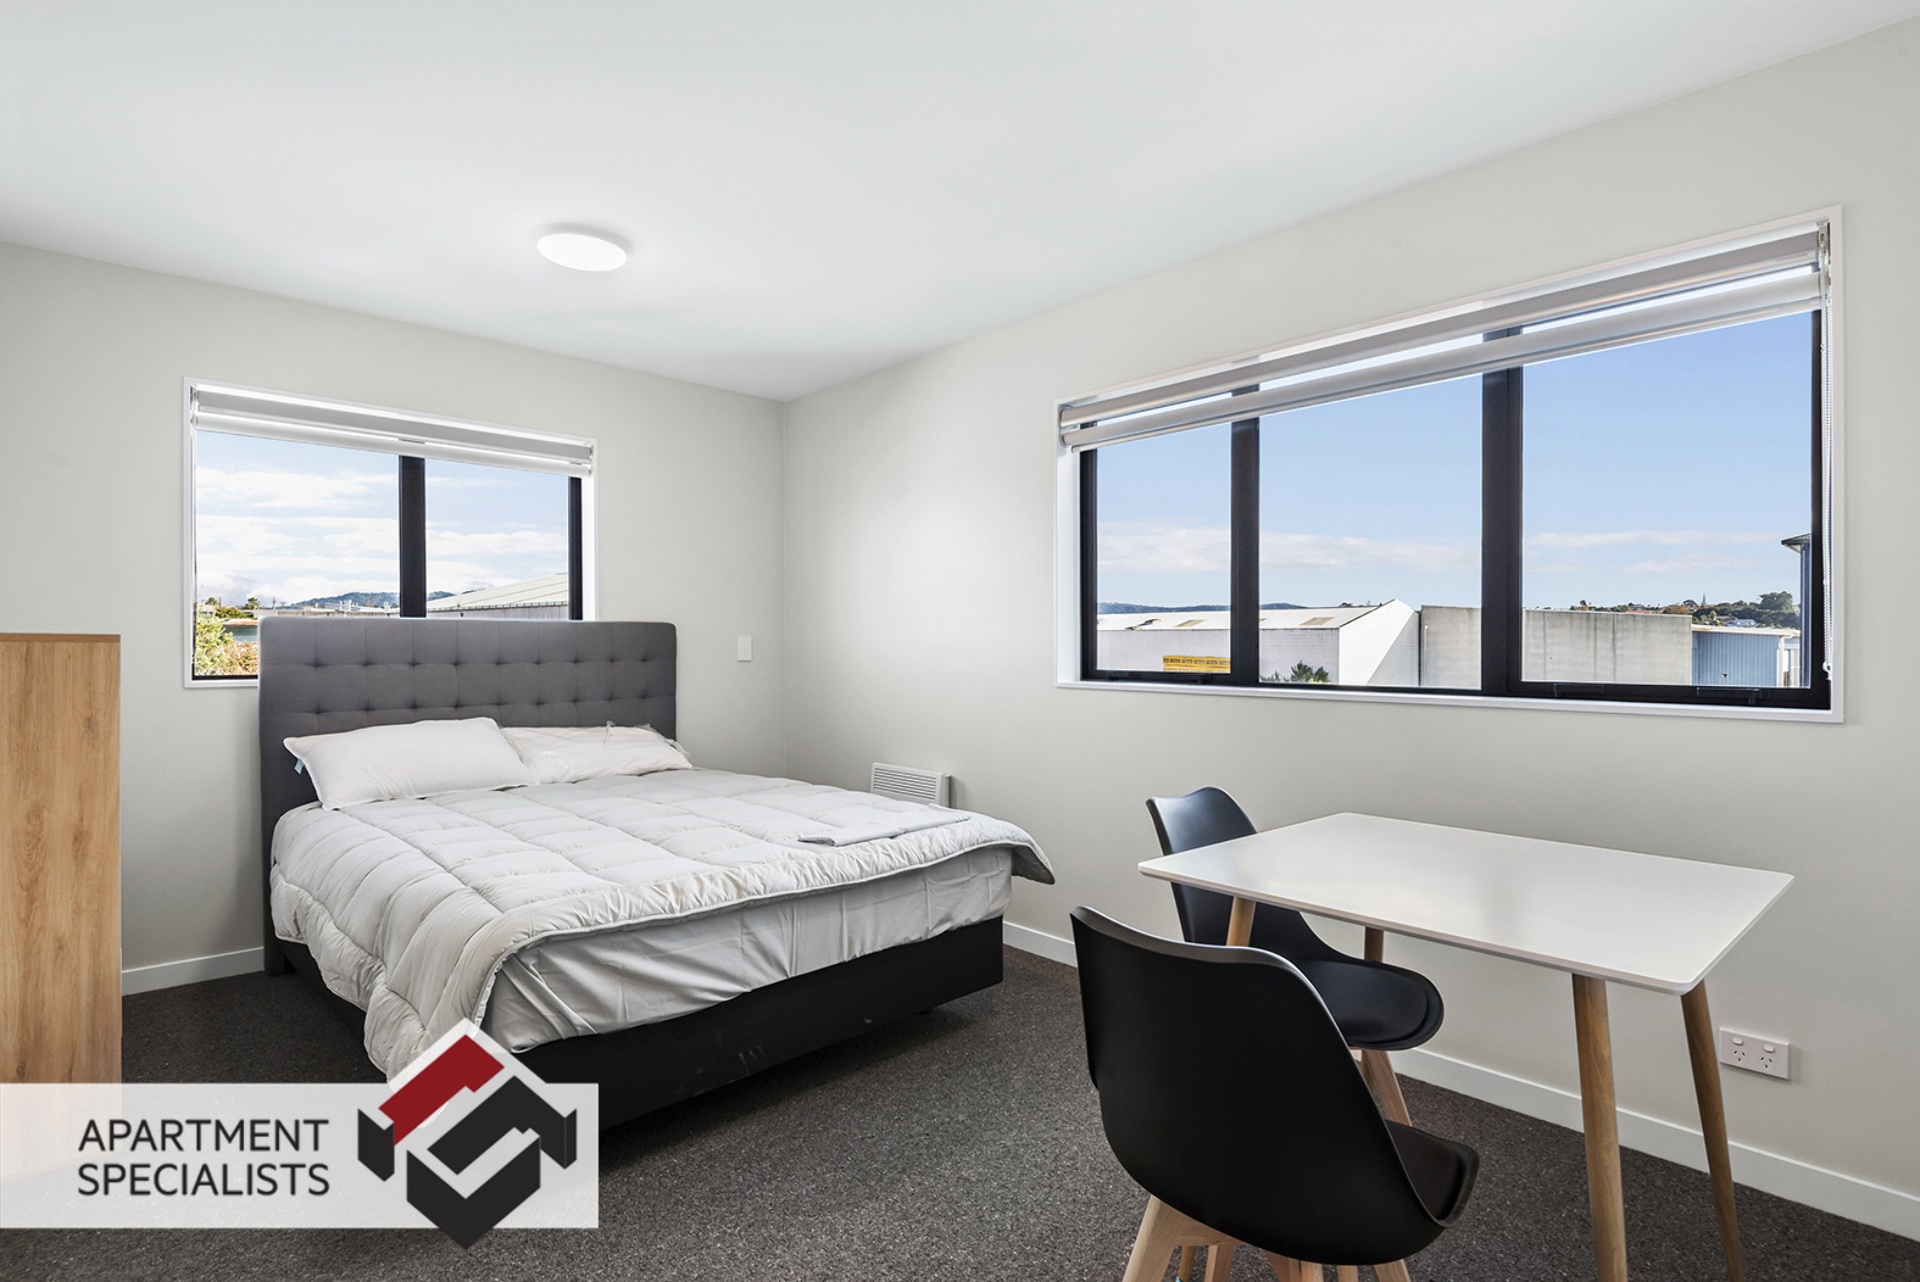 6 | 57 Henderson Valley Road, Henderson Valley | Apartment Specialists